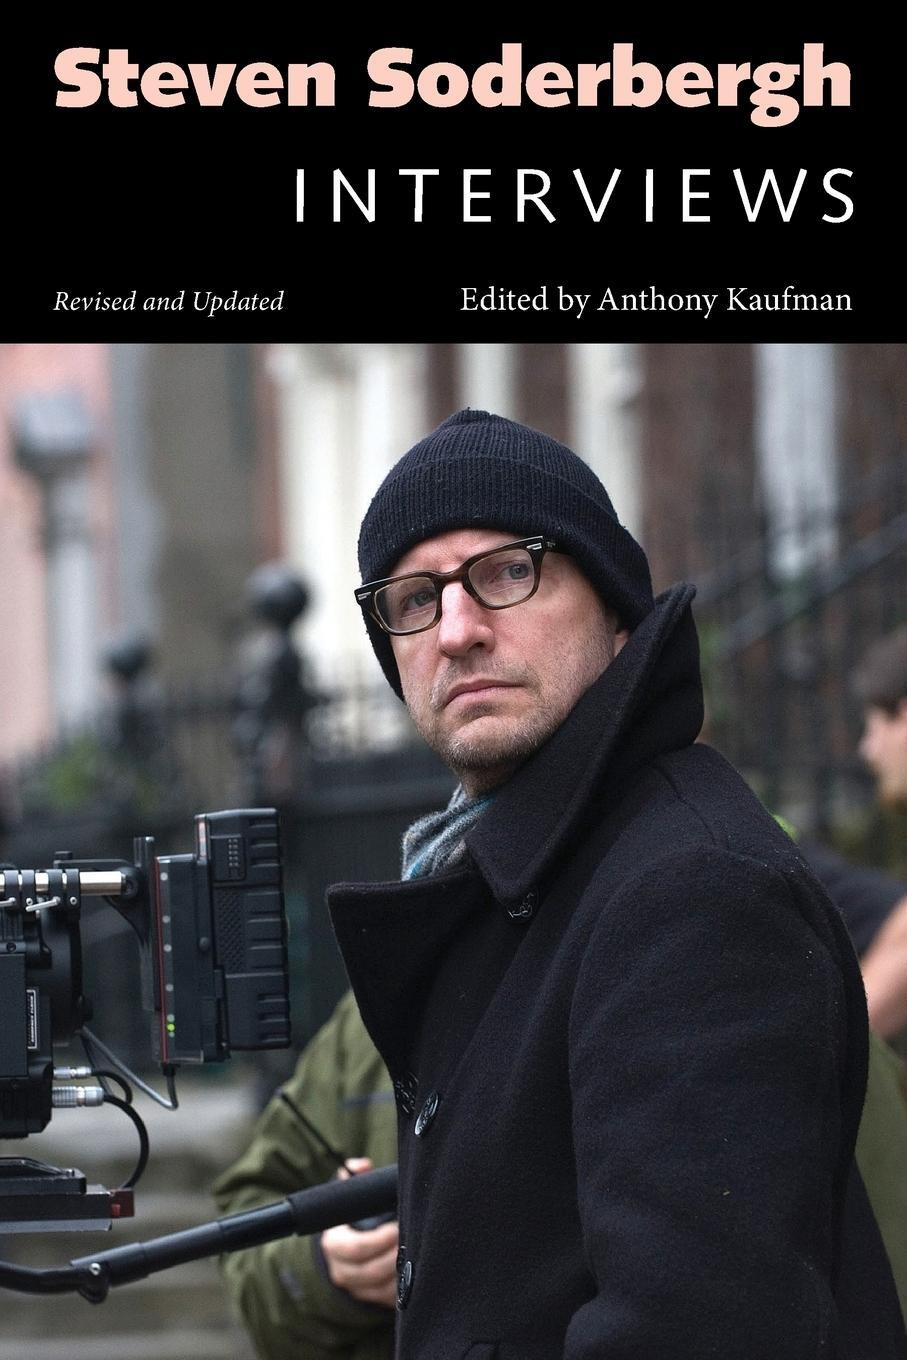 Cover: 9781496820341 | Steven Soderbergh | Interviews, Revised and Updated | Anthony Kaufman